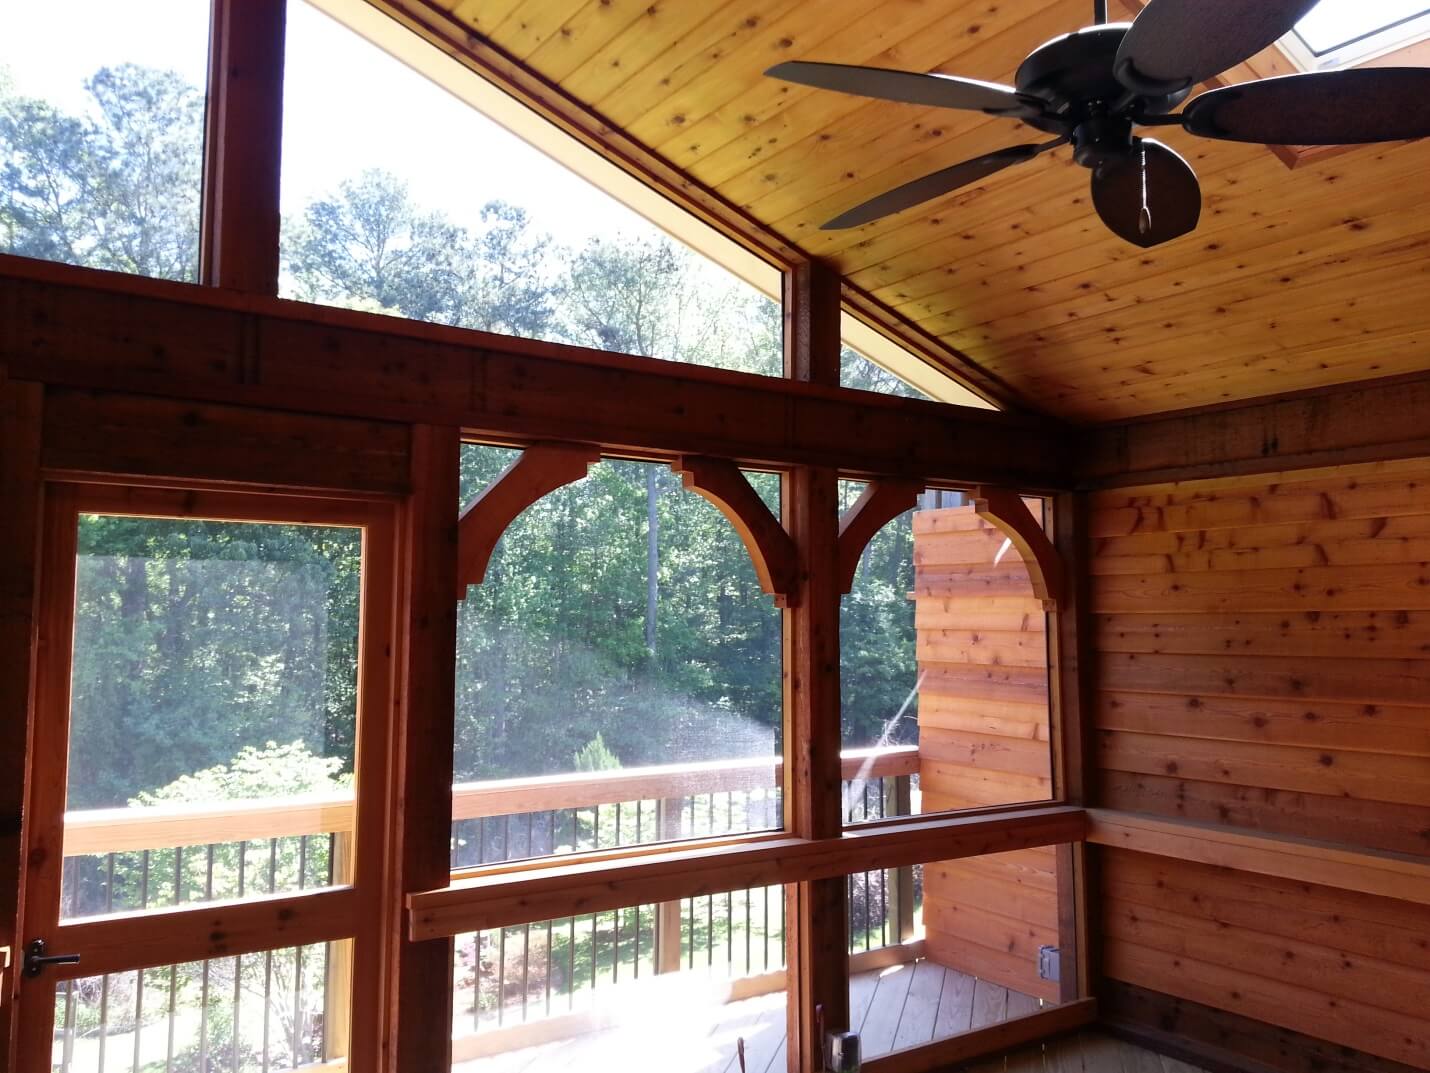 Screened porch details